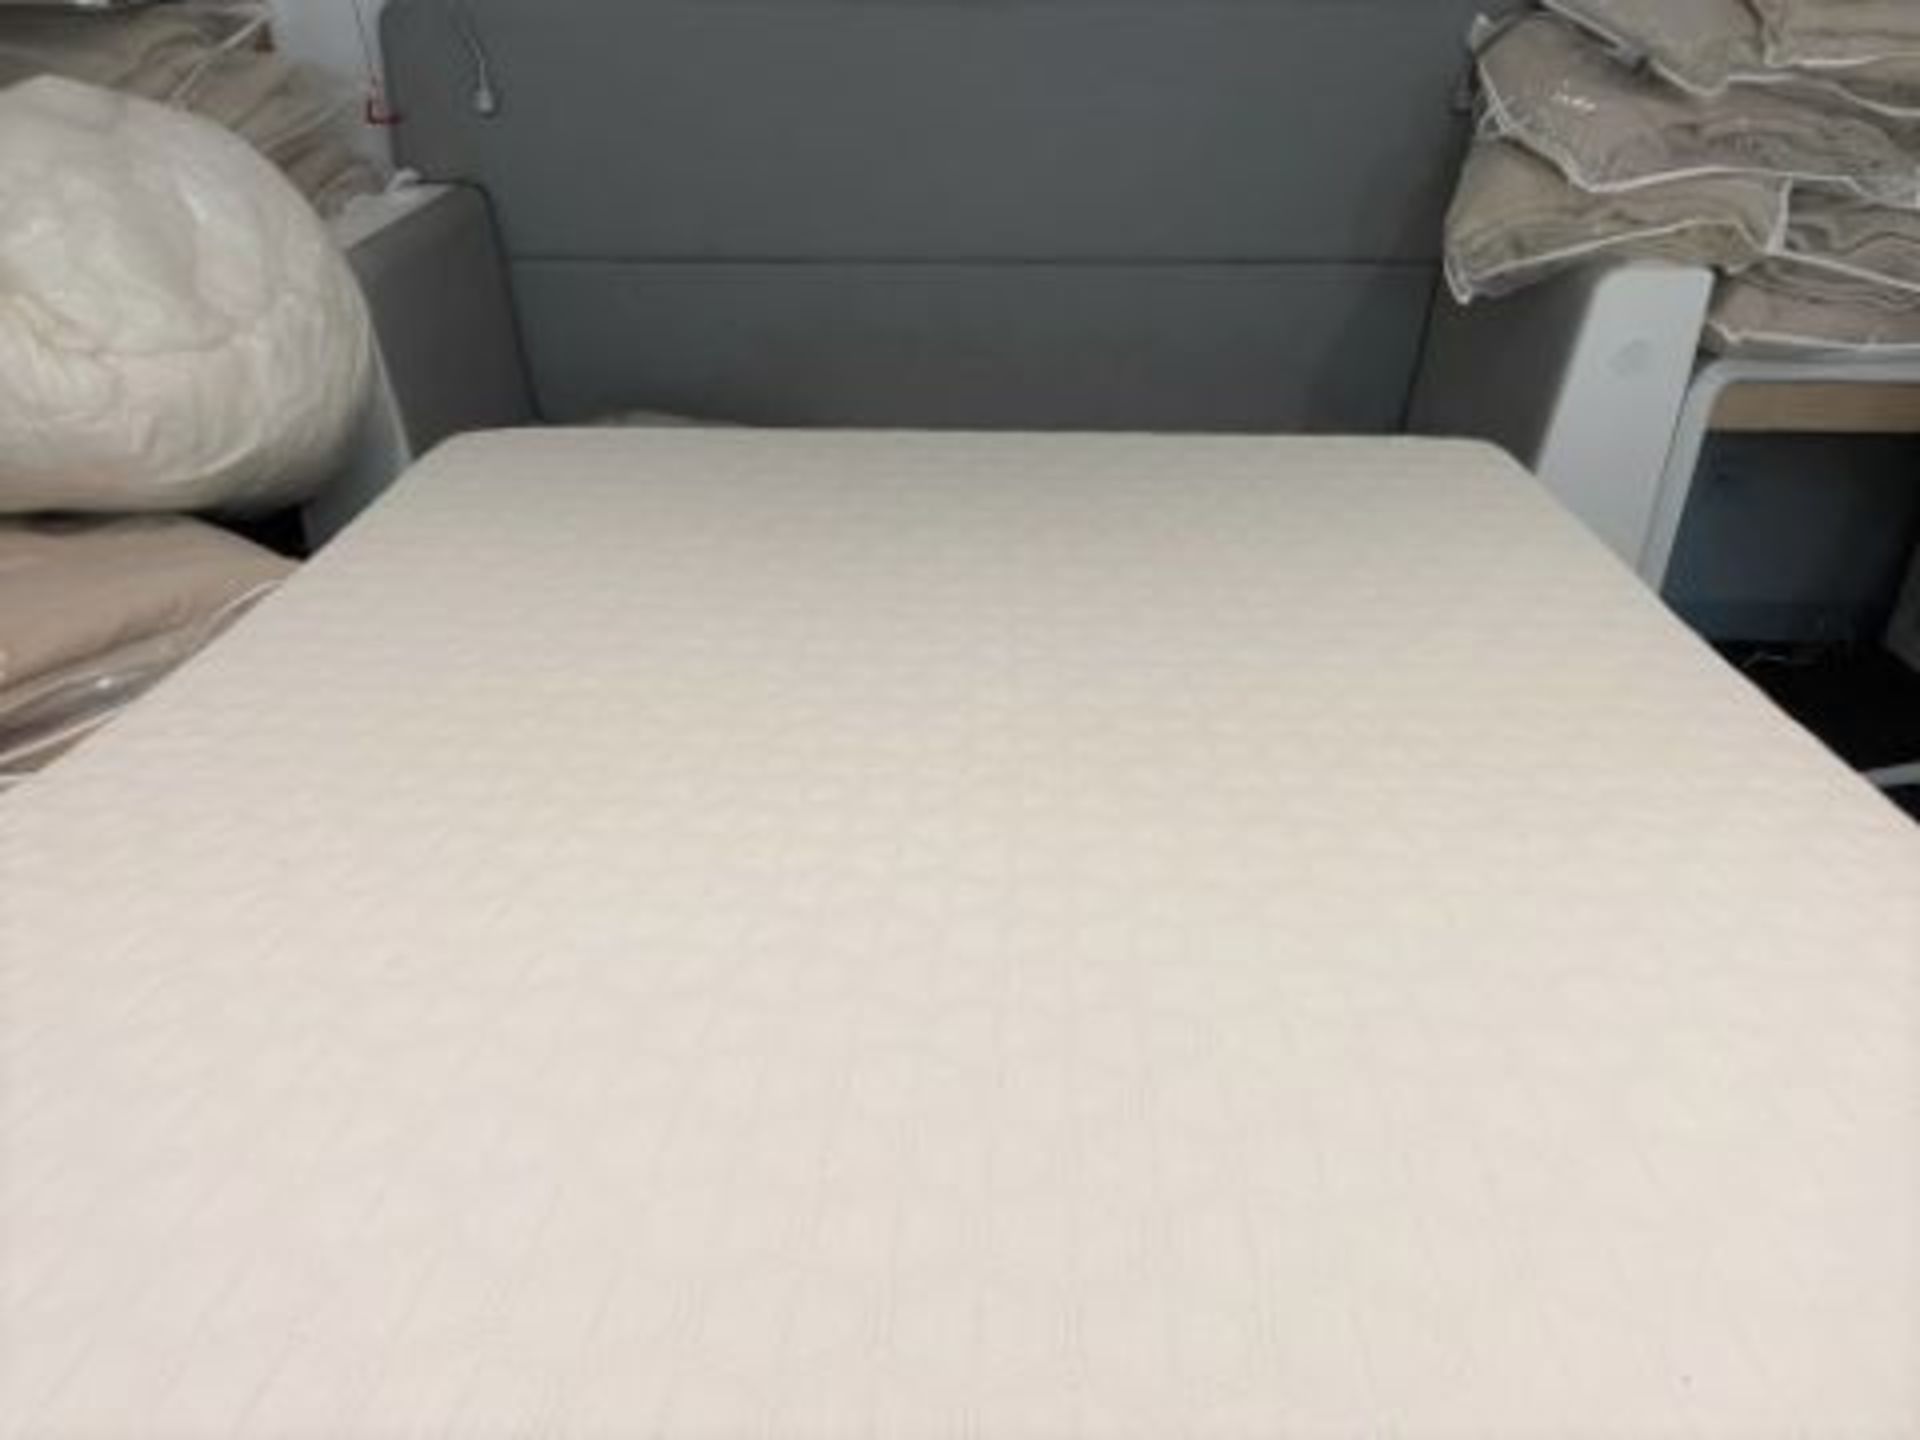 1 x Double Adjustable Space Saving Smart Bed With Serta Motion Memory Foam Mattress - Signature - Image 12 of 12